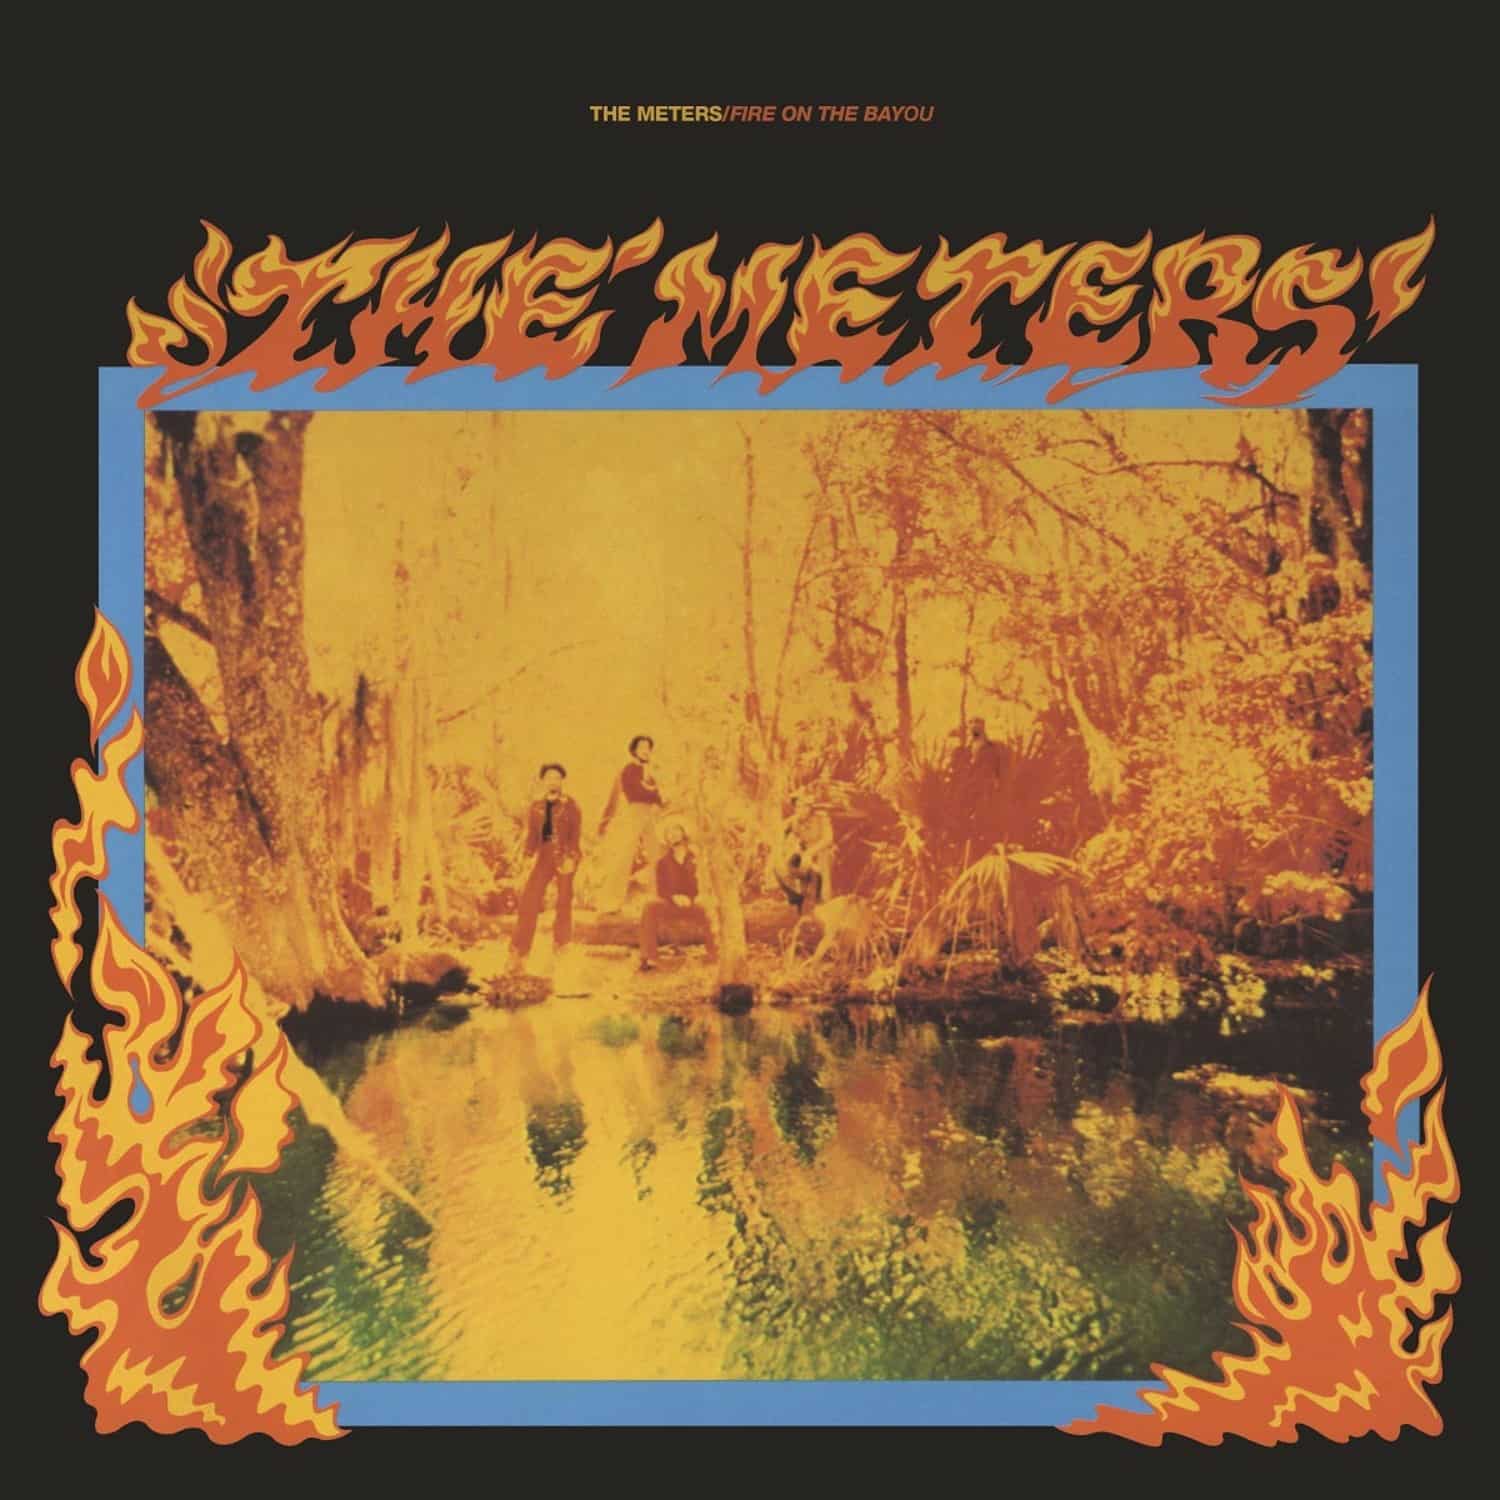 Meters - FIRE ON THE BAYOU+5 